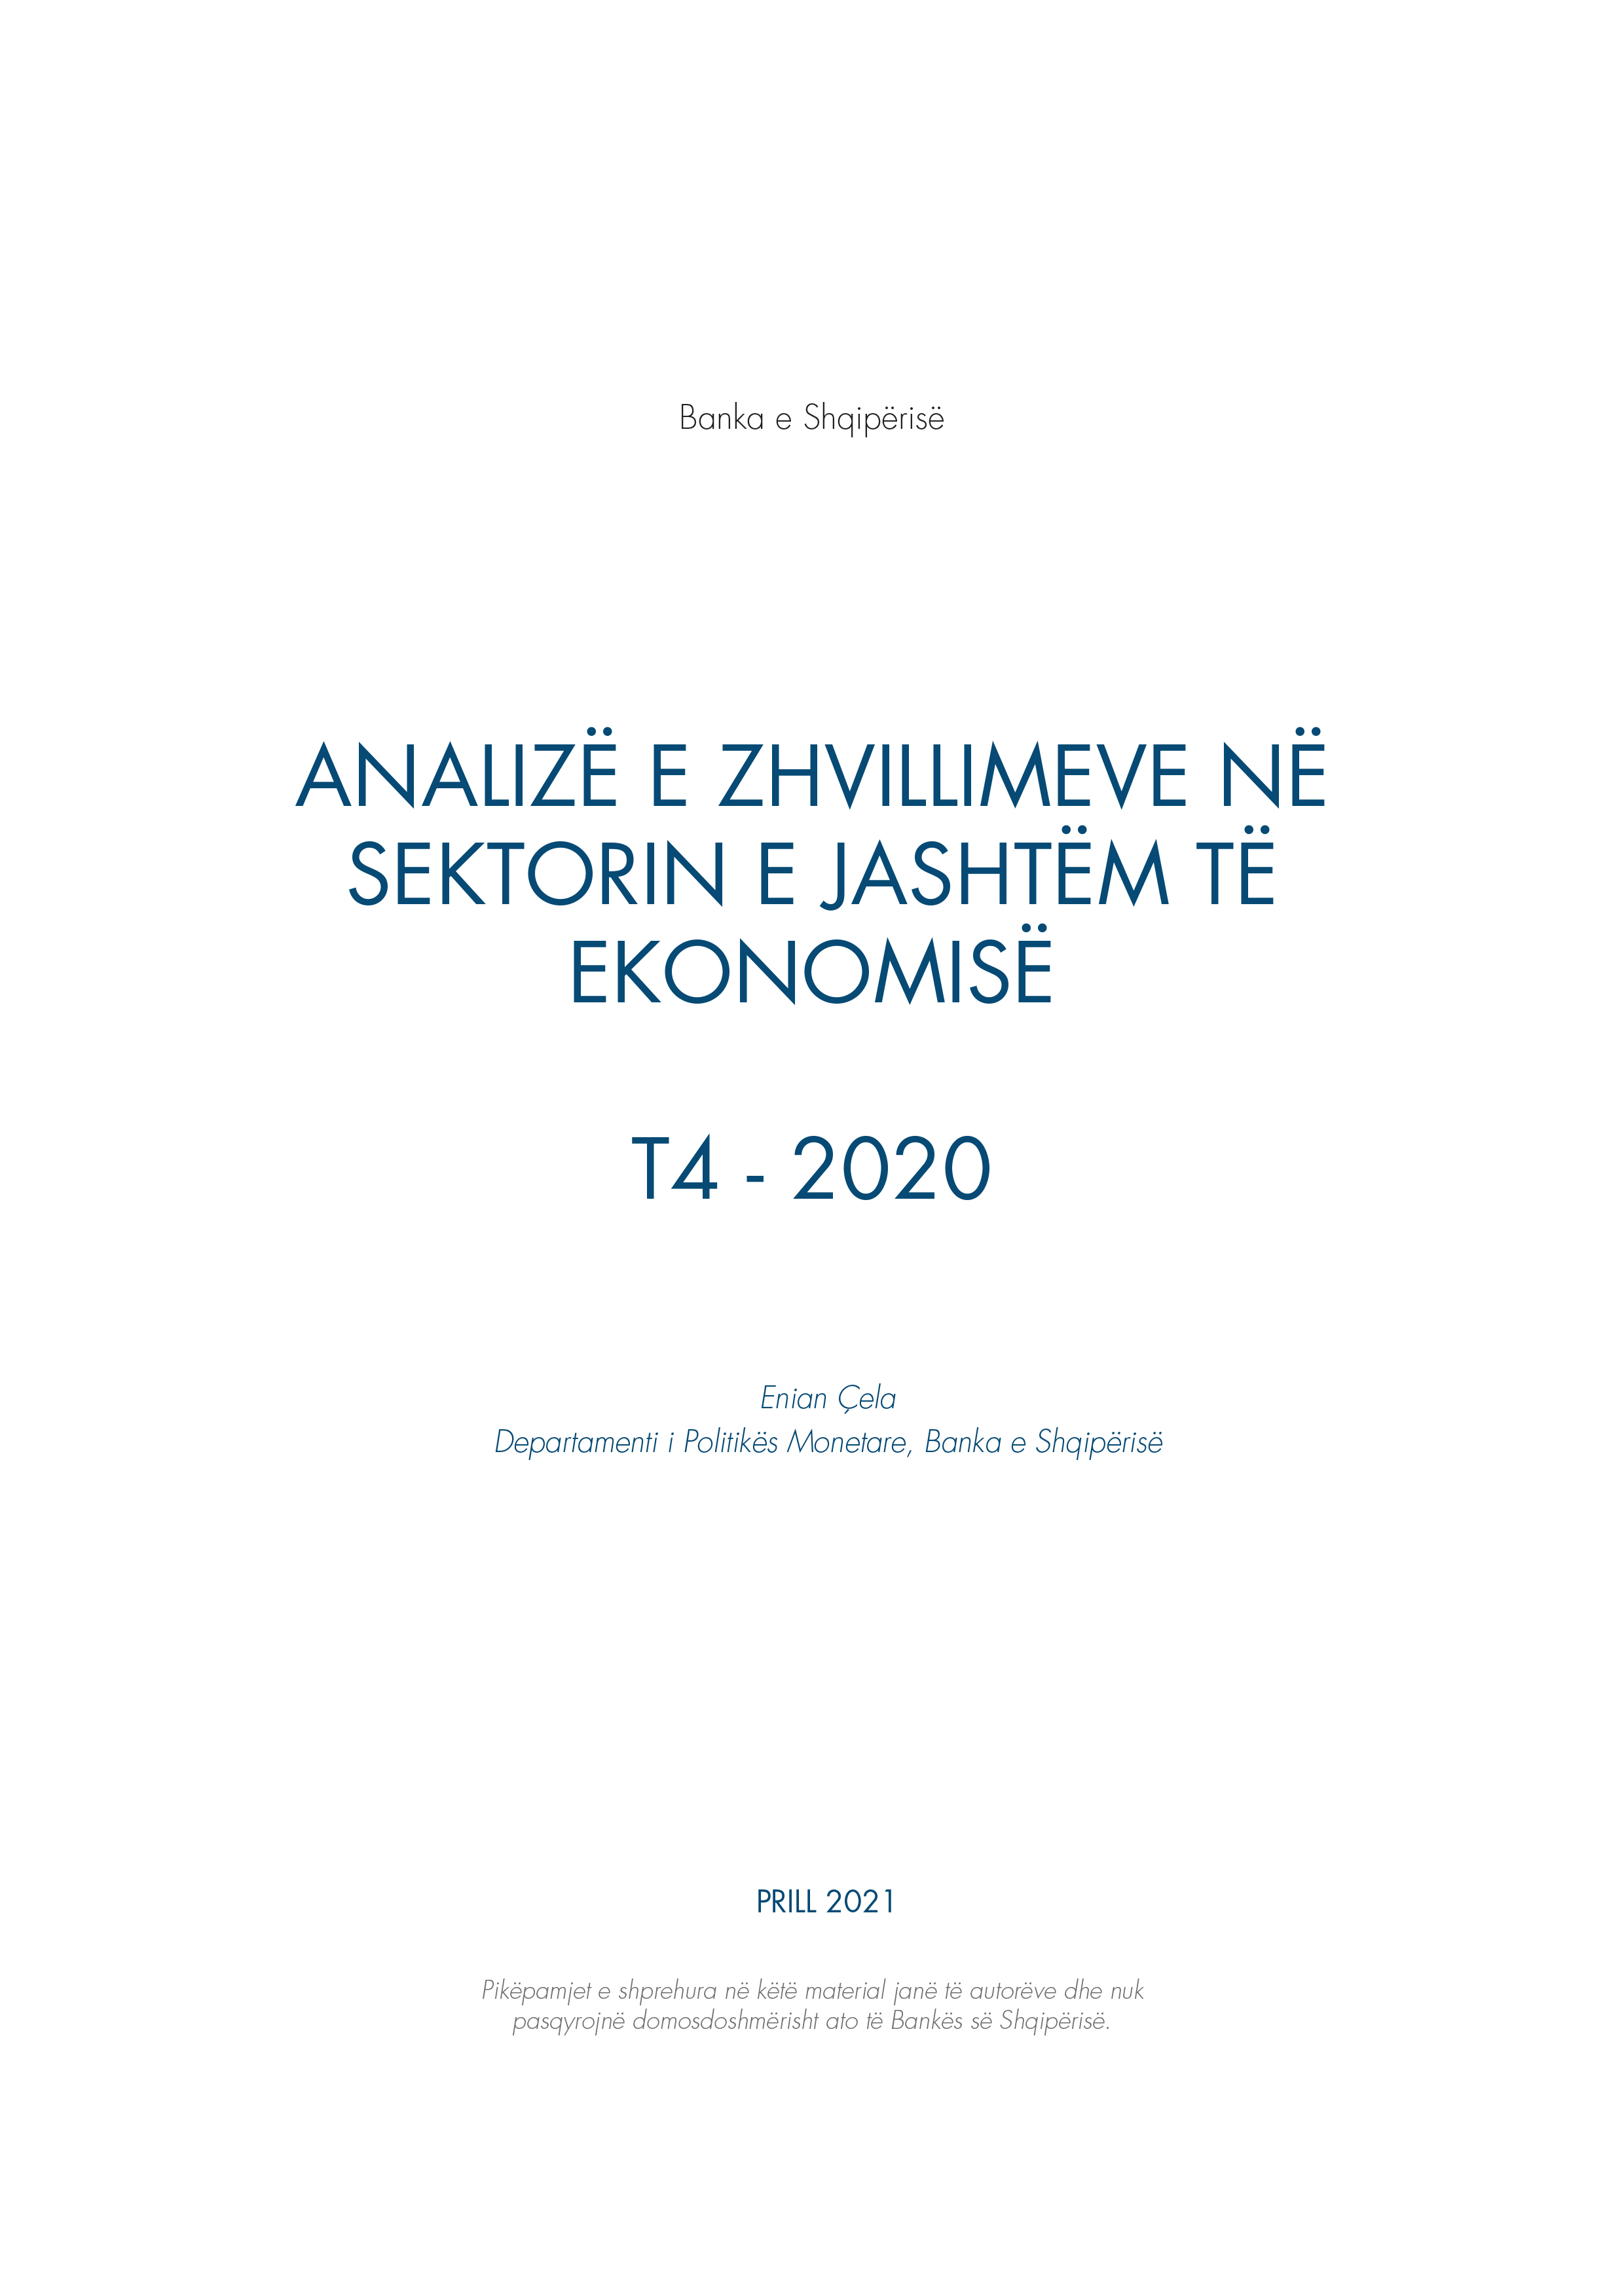 Analysis of developments in the external sector of the economy 2020 Q4